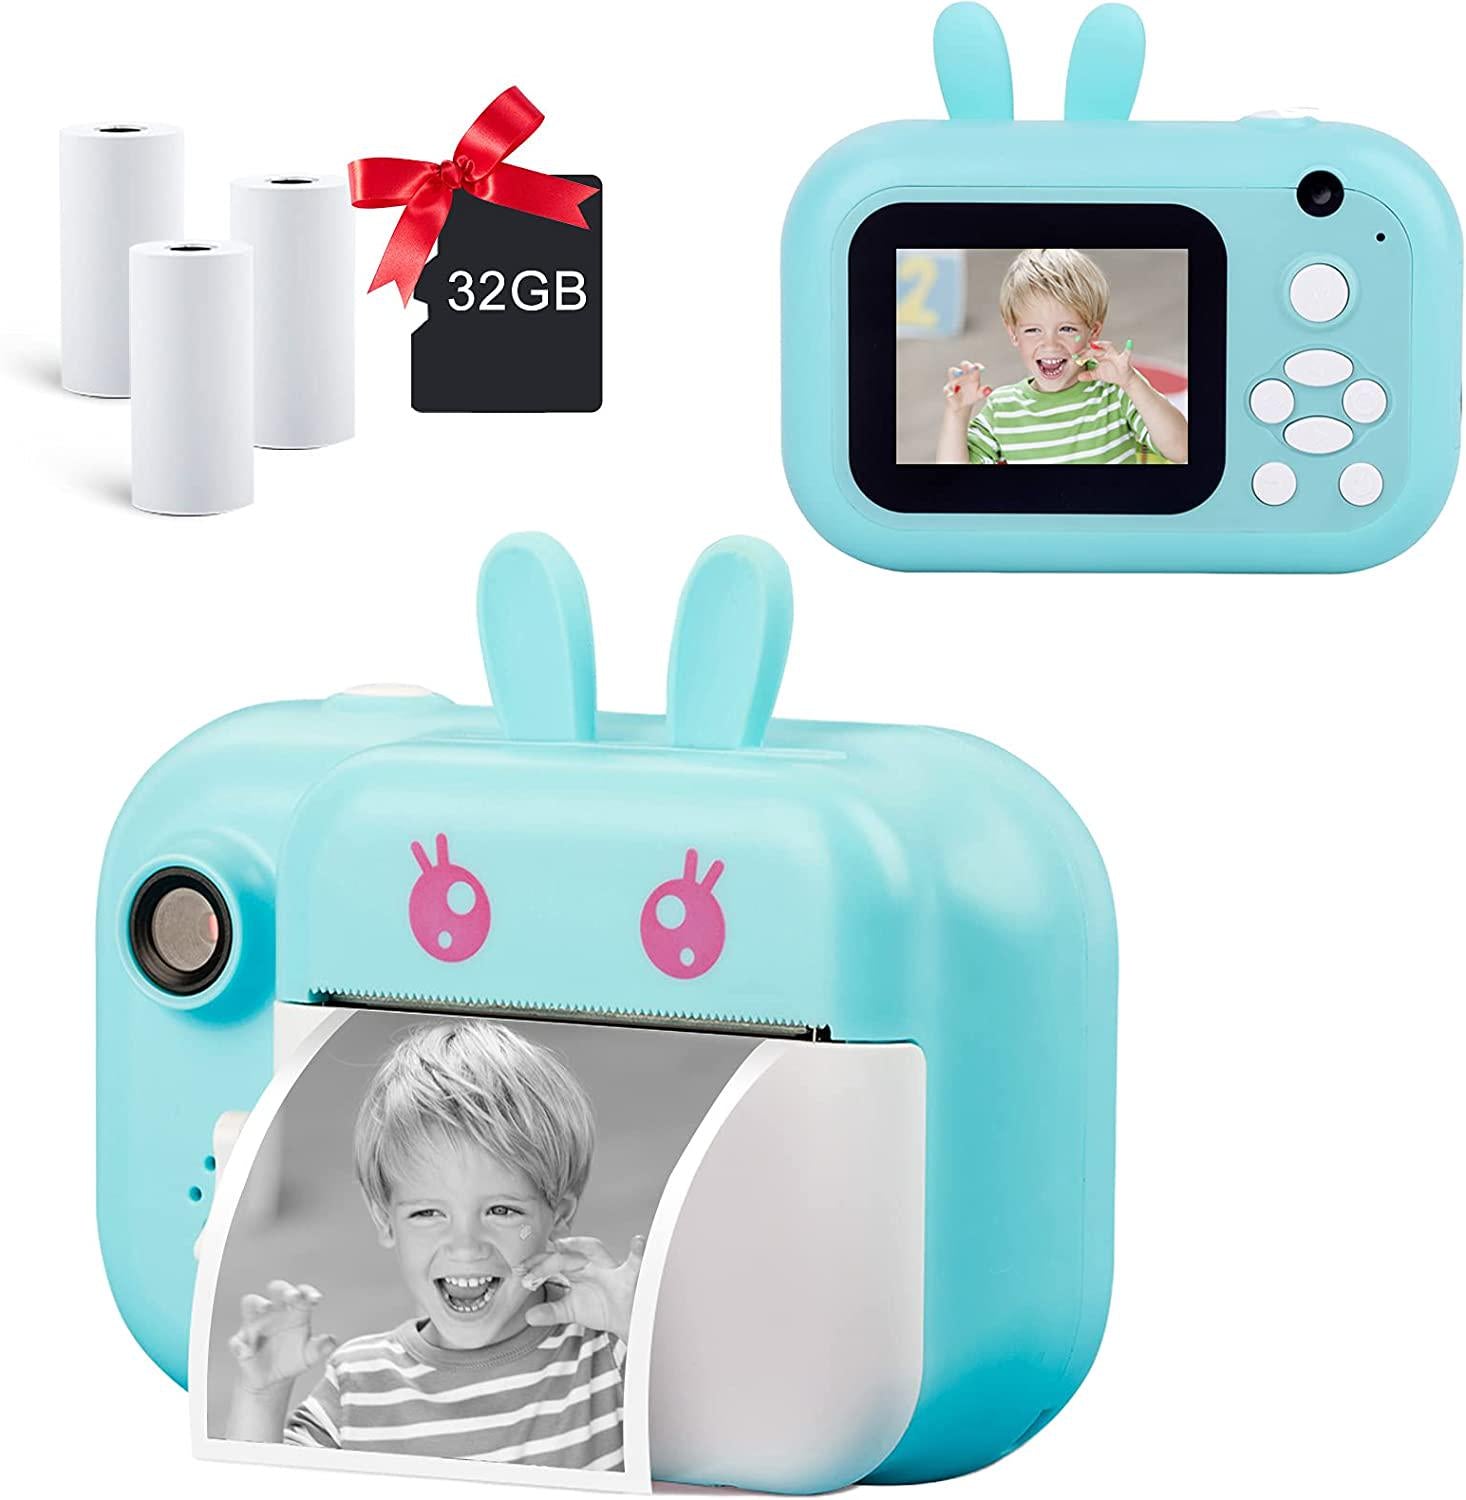 MINIBEAR, MINIBEAR Instant Print Camera for Kids with Print Paper, 40MP Zero Ink Digital Camera, Kids Selfie Video Camera, Child Toy Camera, Kids Camcorder with 2.4 Inch Screen and 32GB TF Card (Blue, H5)